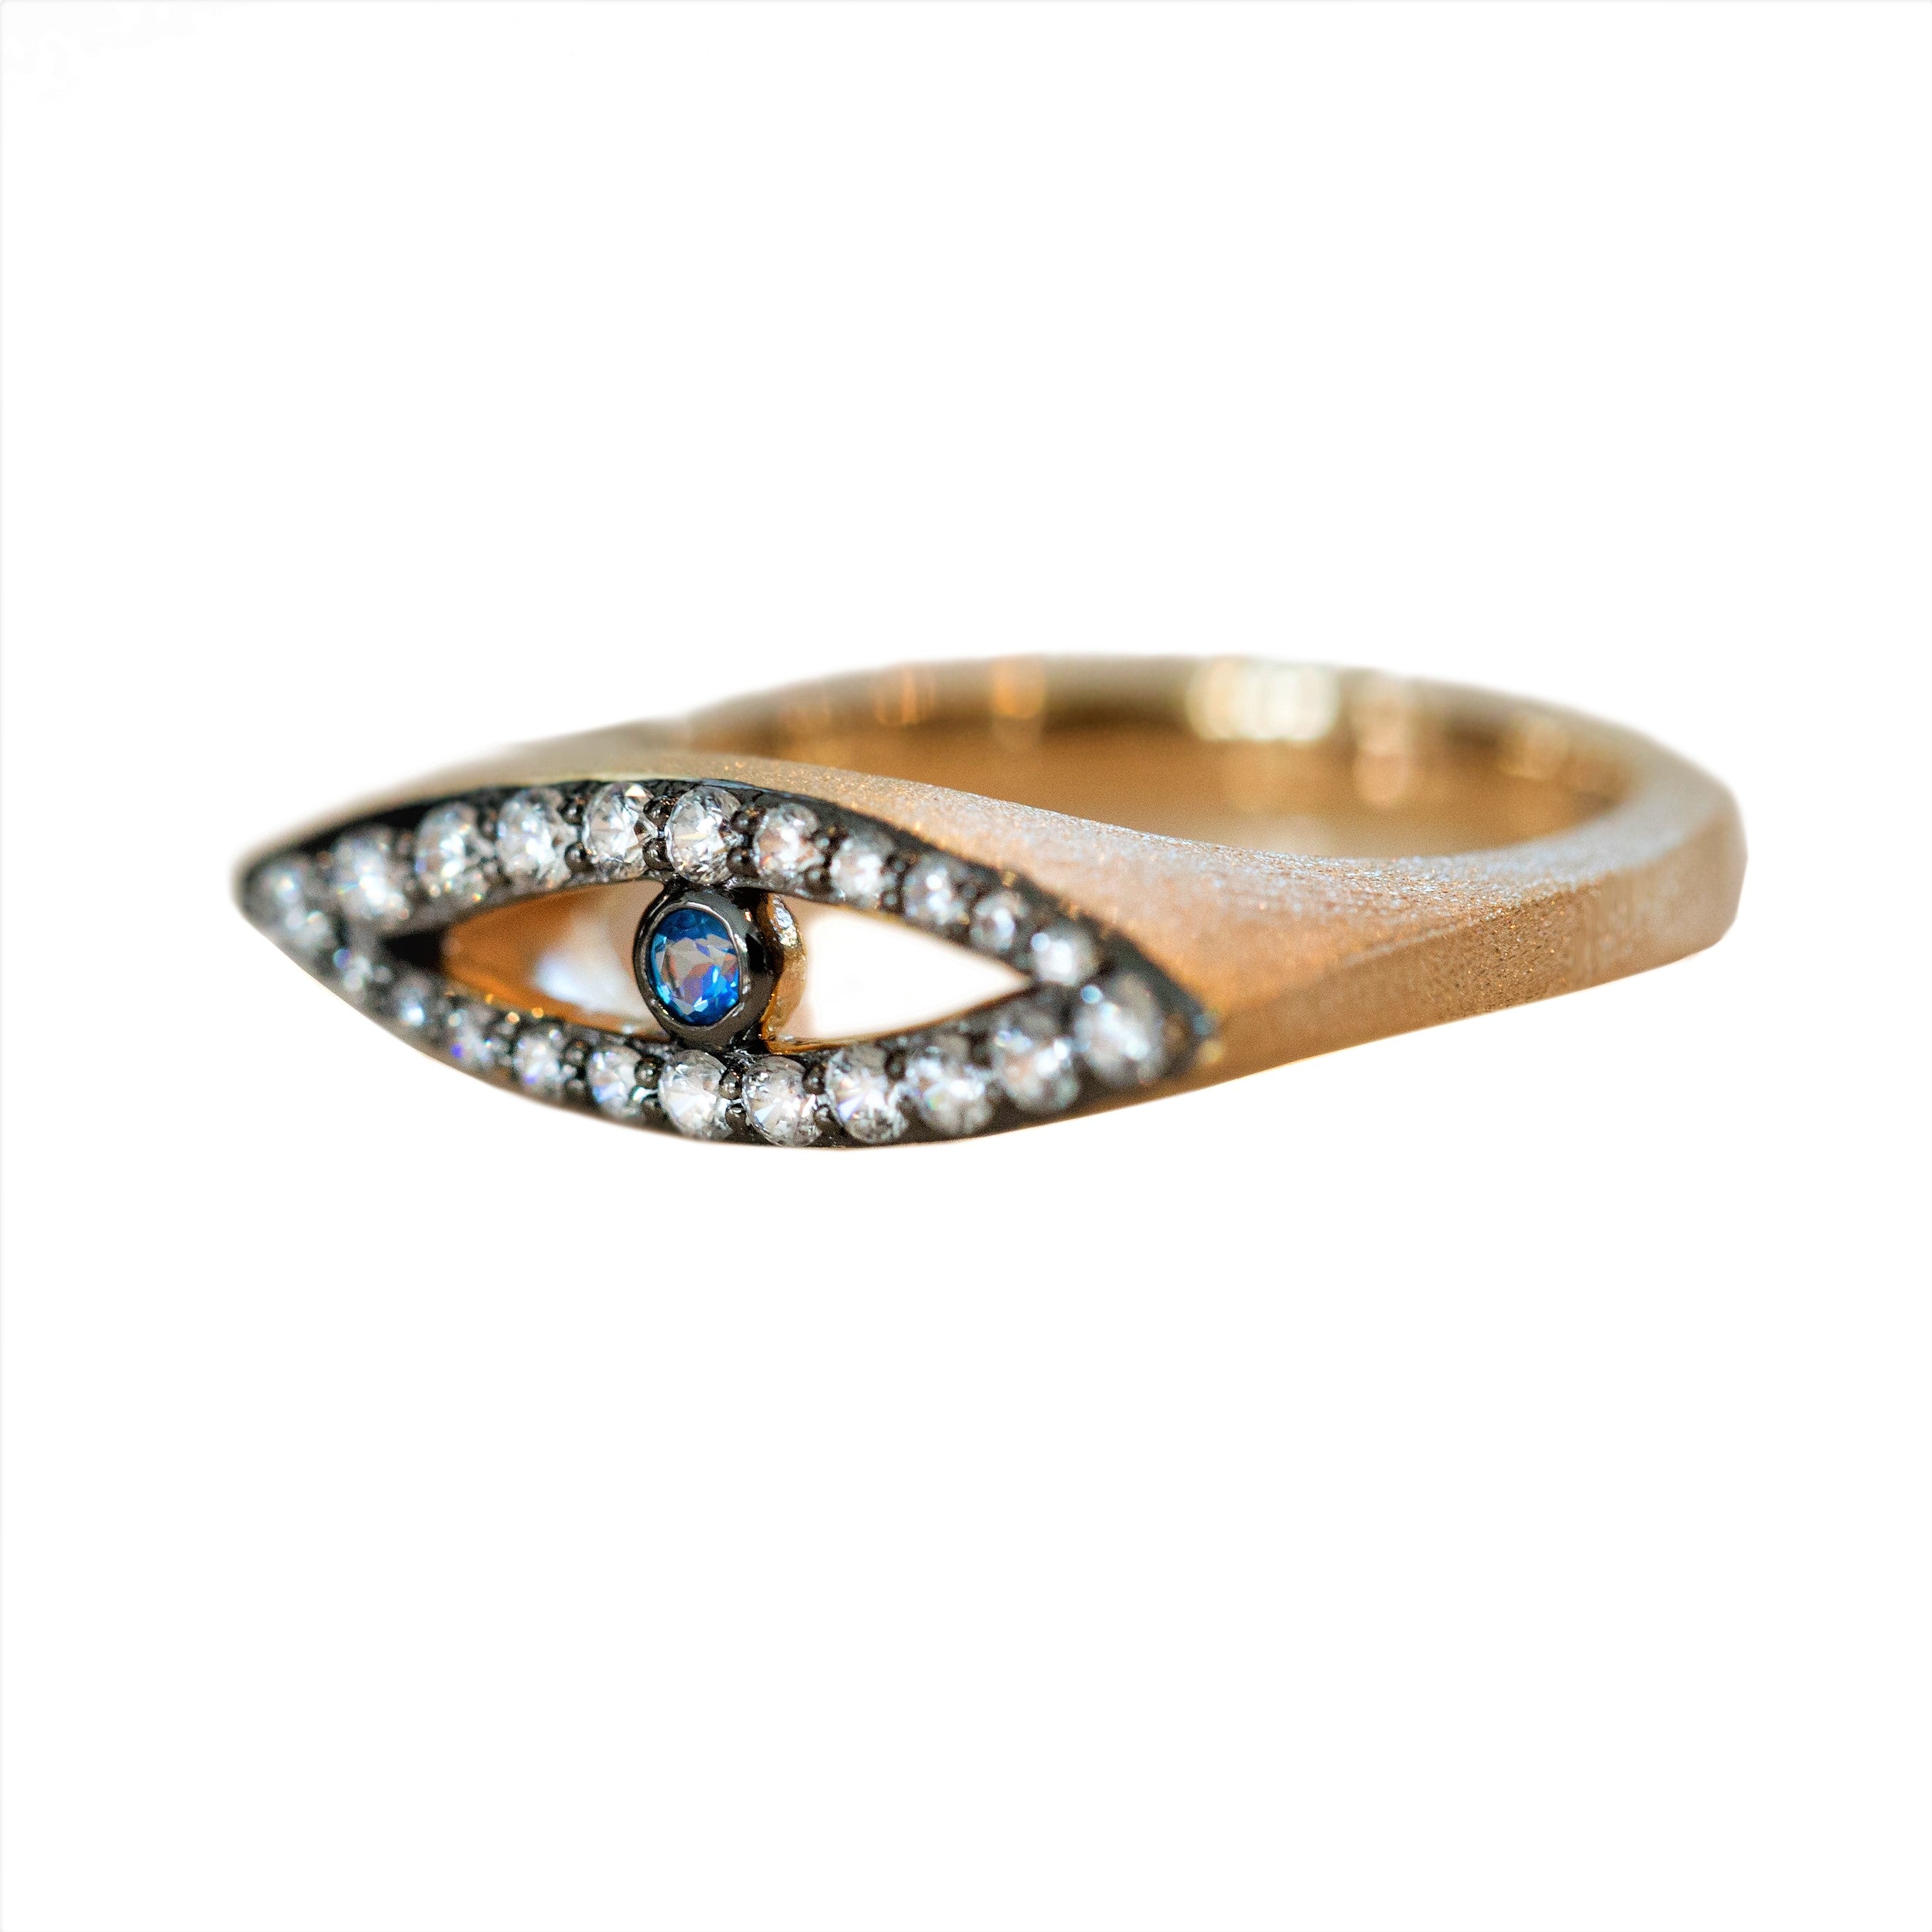 The Protective Eye Vermeil Gold Ring - 6